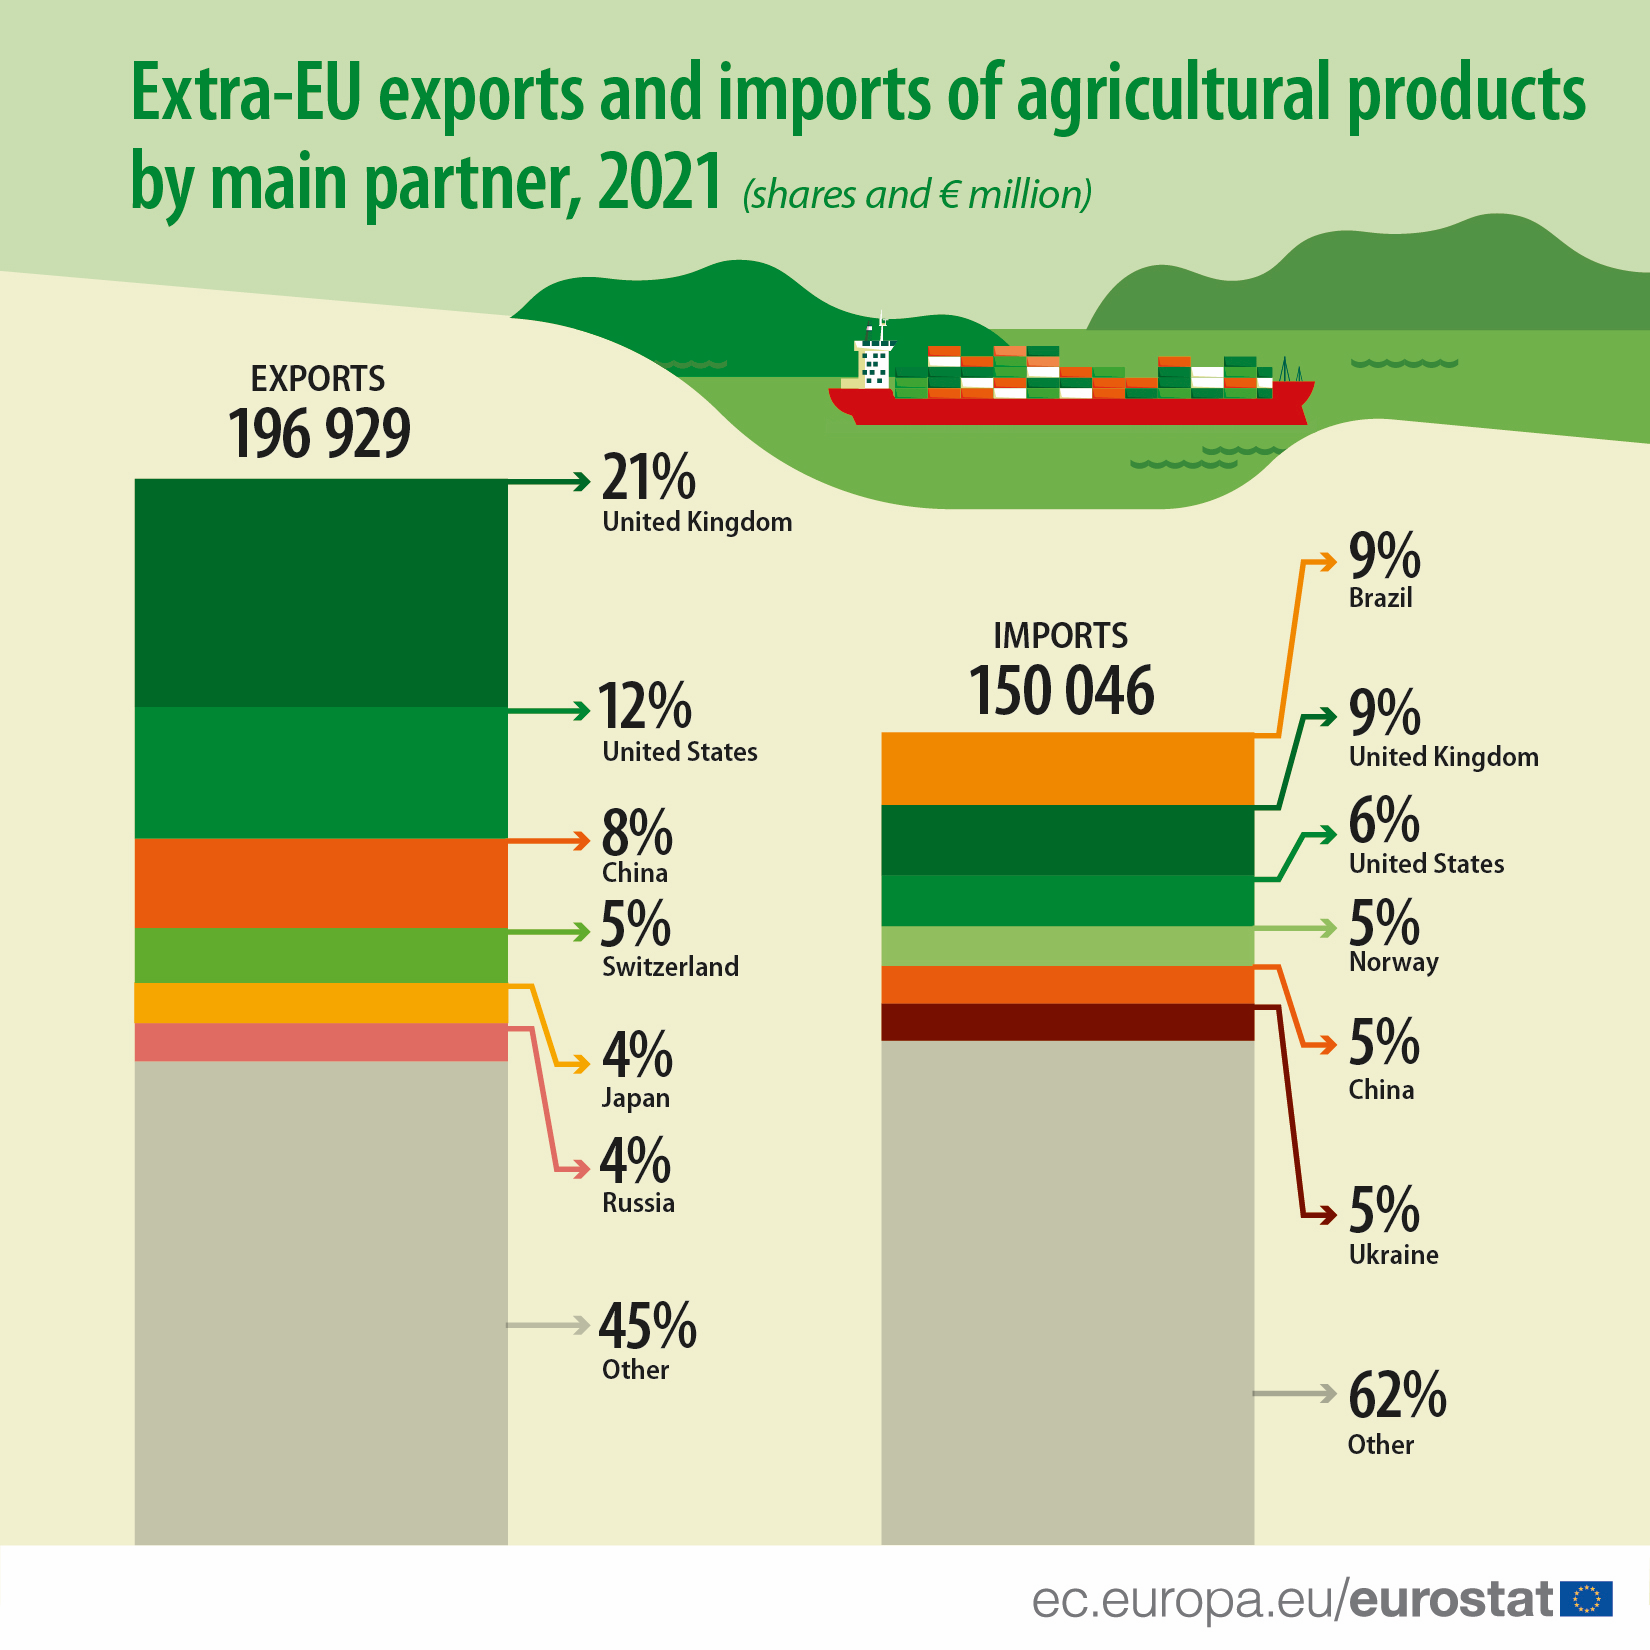 Extra-EU exports and imports of agricultural products by main partner, 2021 (shares and million euros)